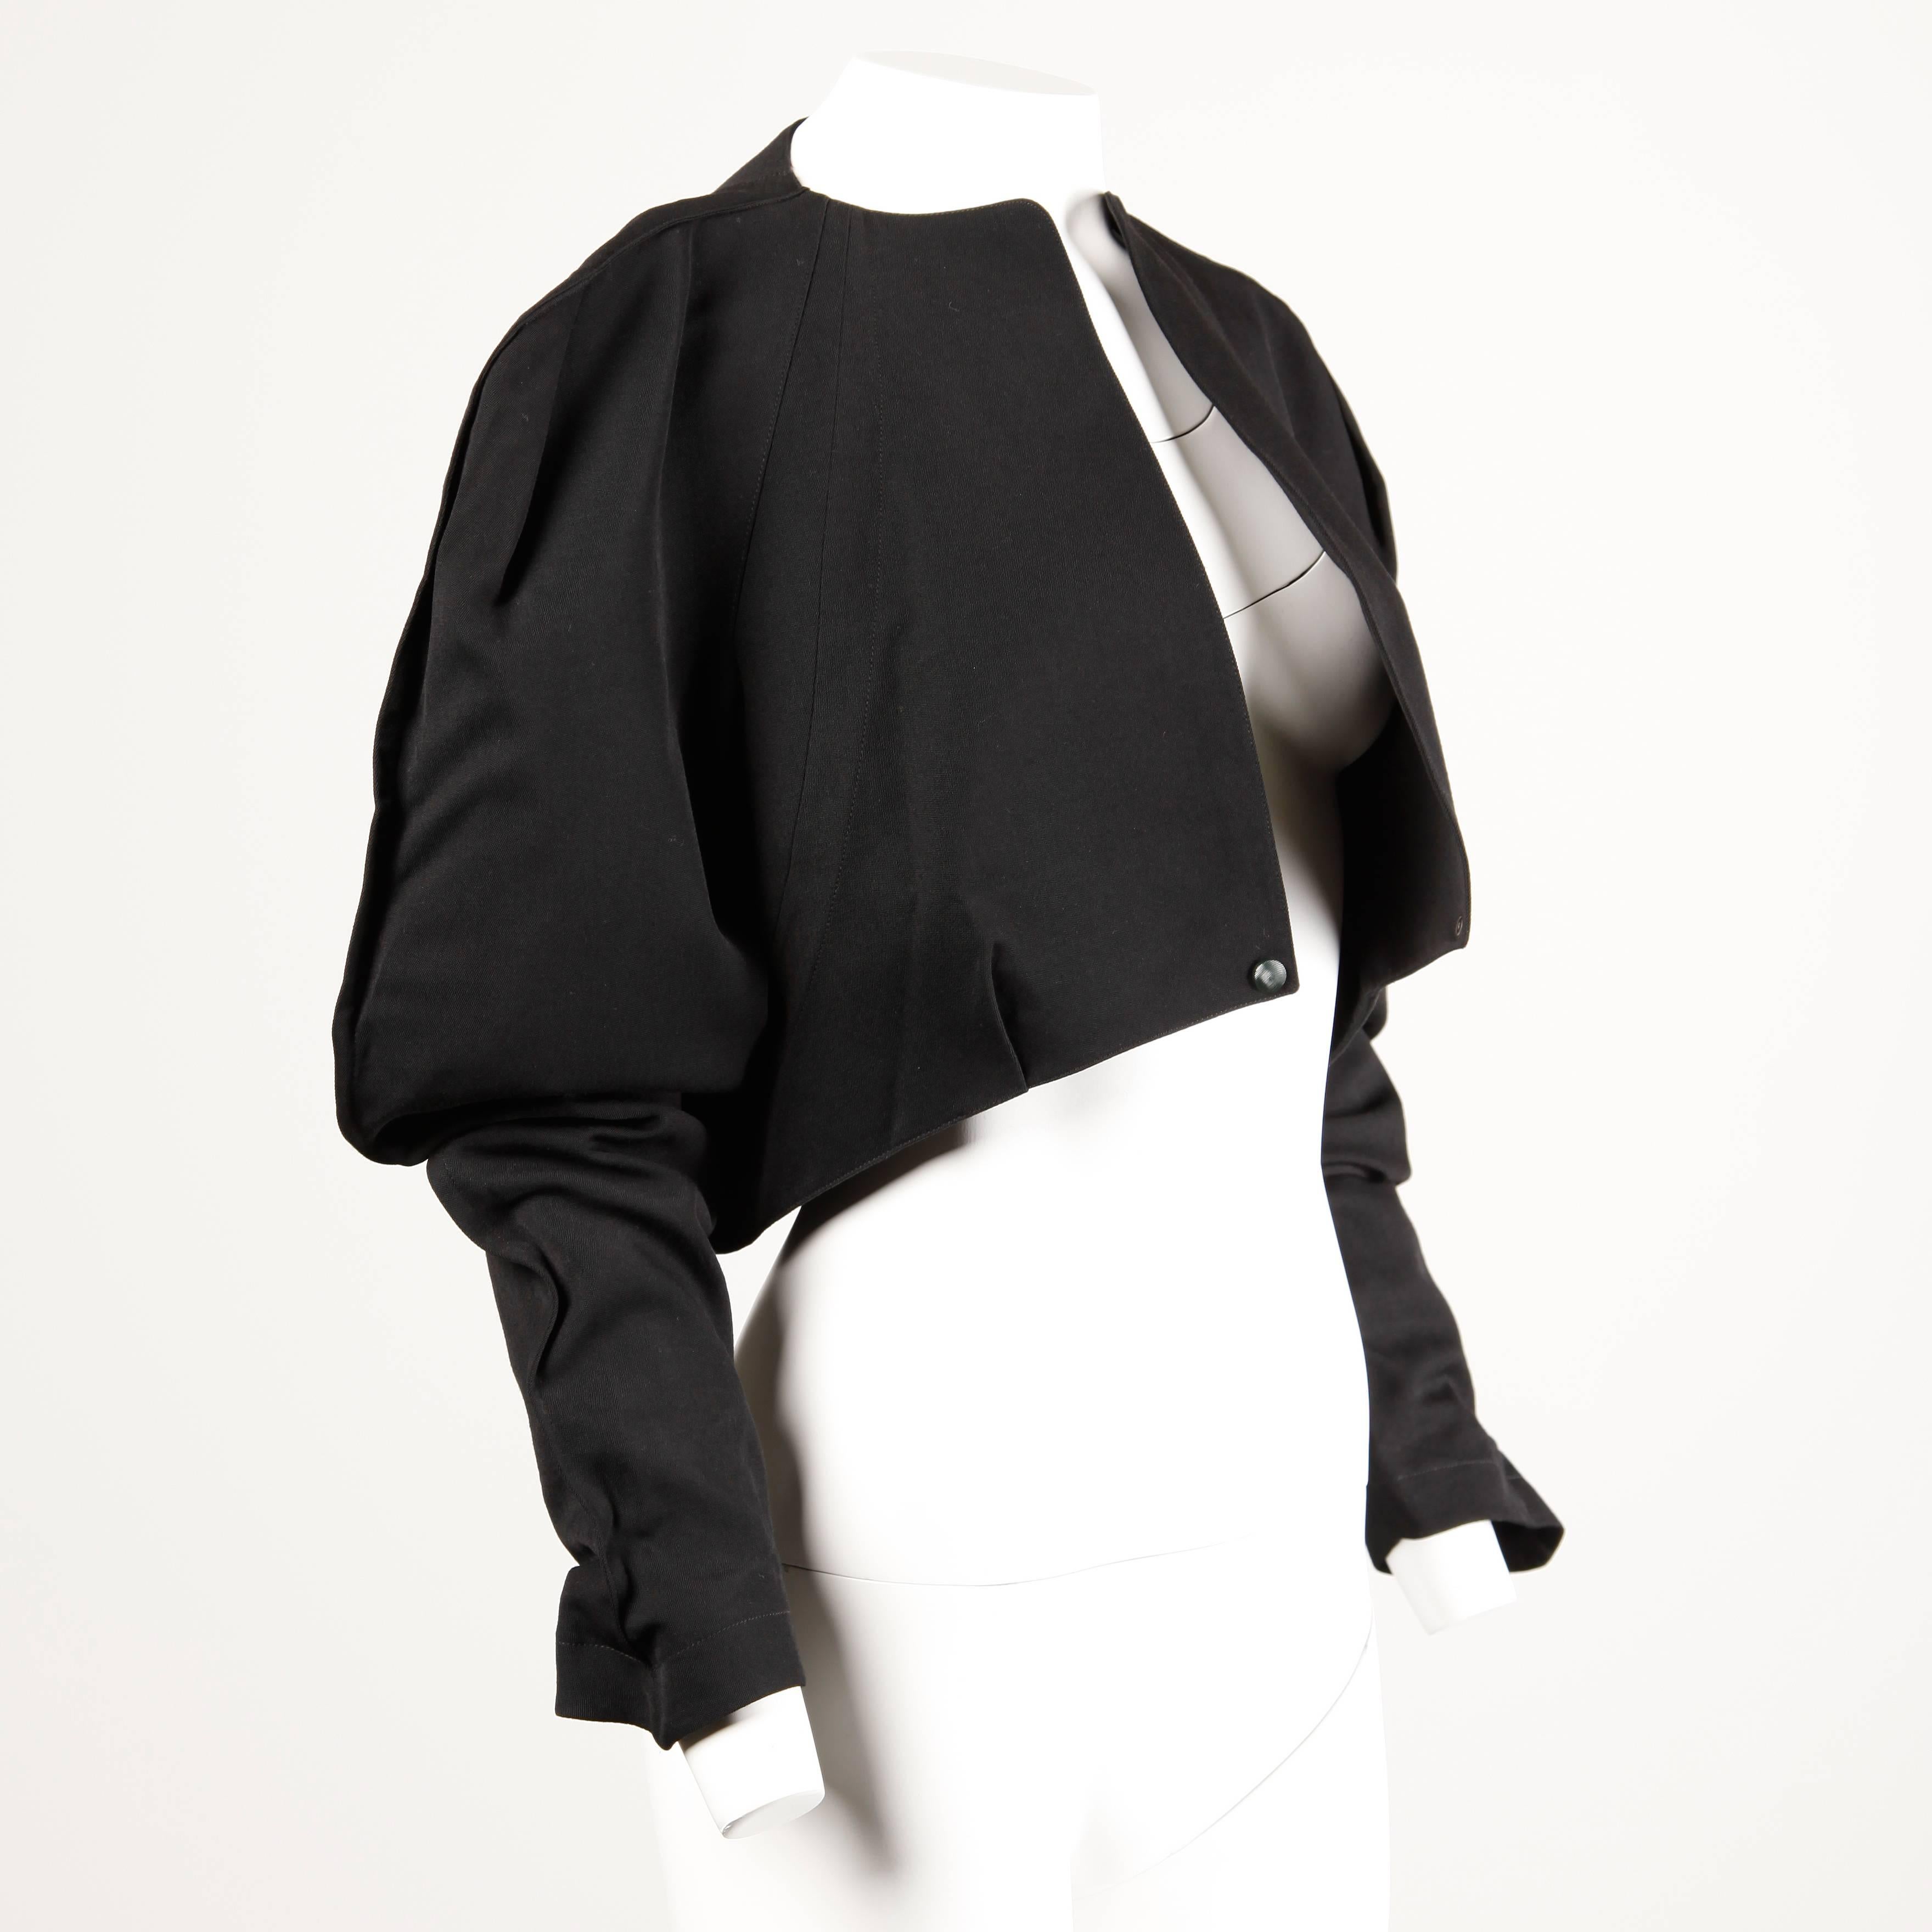 Amazing vintage avant garde jacket by Thierry Mugler from the 1980s! Chic black wool fabric with a avant garde silhouette and oversized sleeves. Single snap closure at the front of the jacket.

Details: 

Fully Lined
Bottom Front Snap